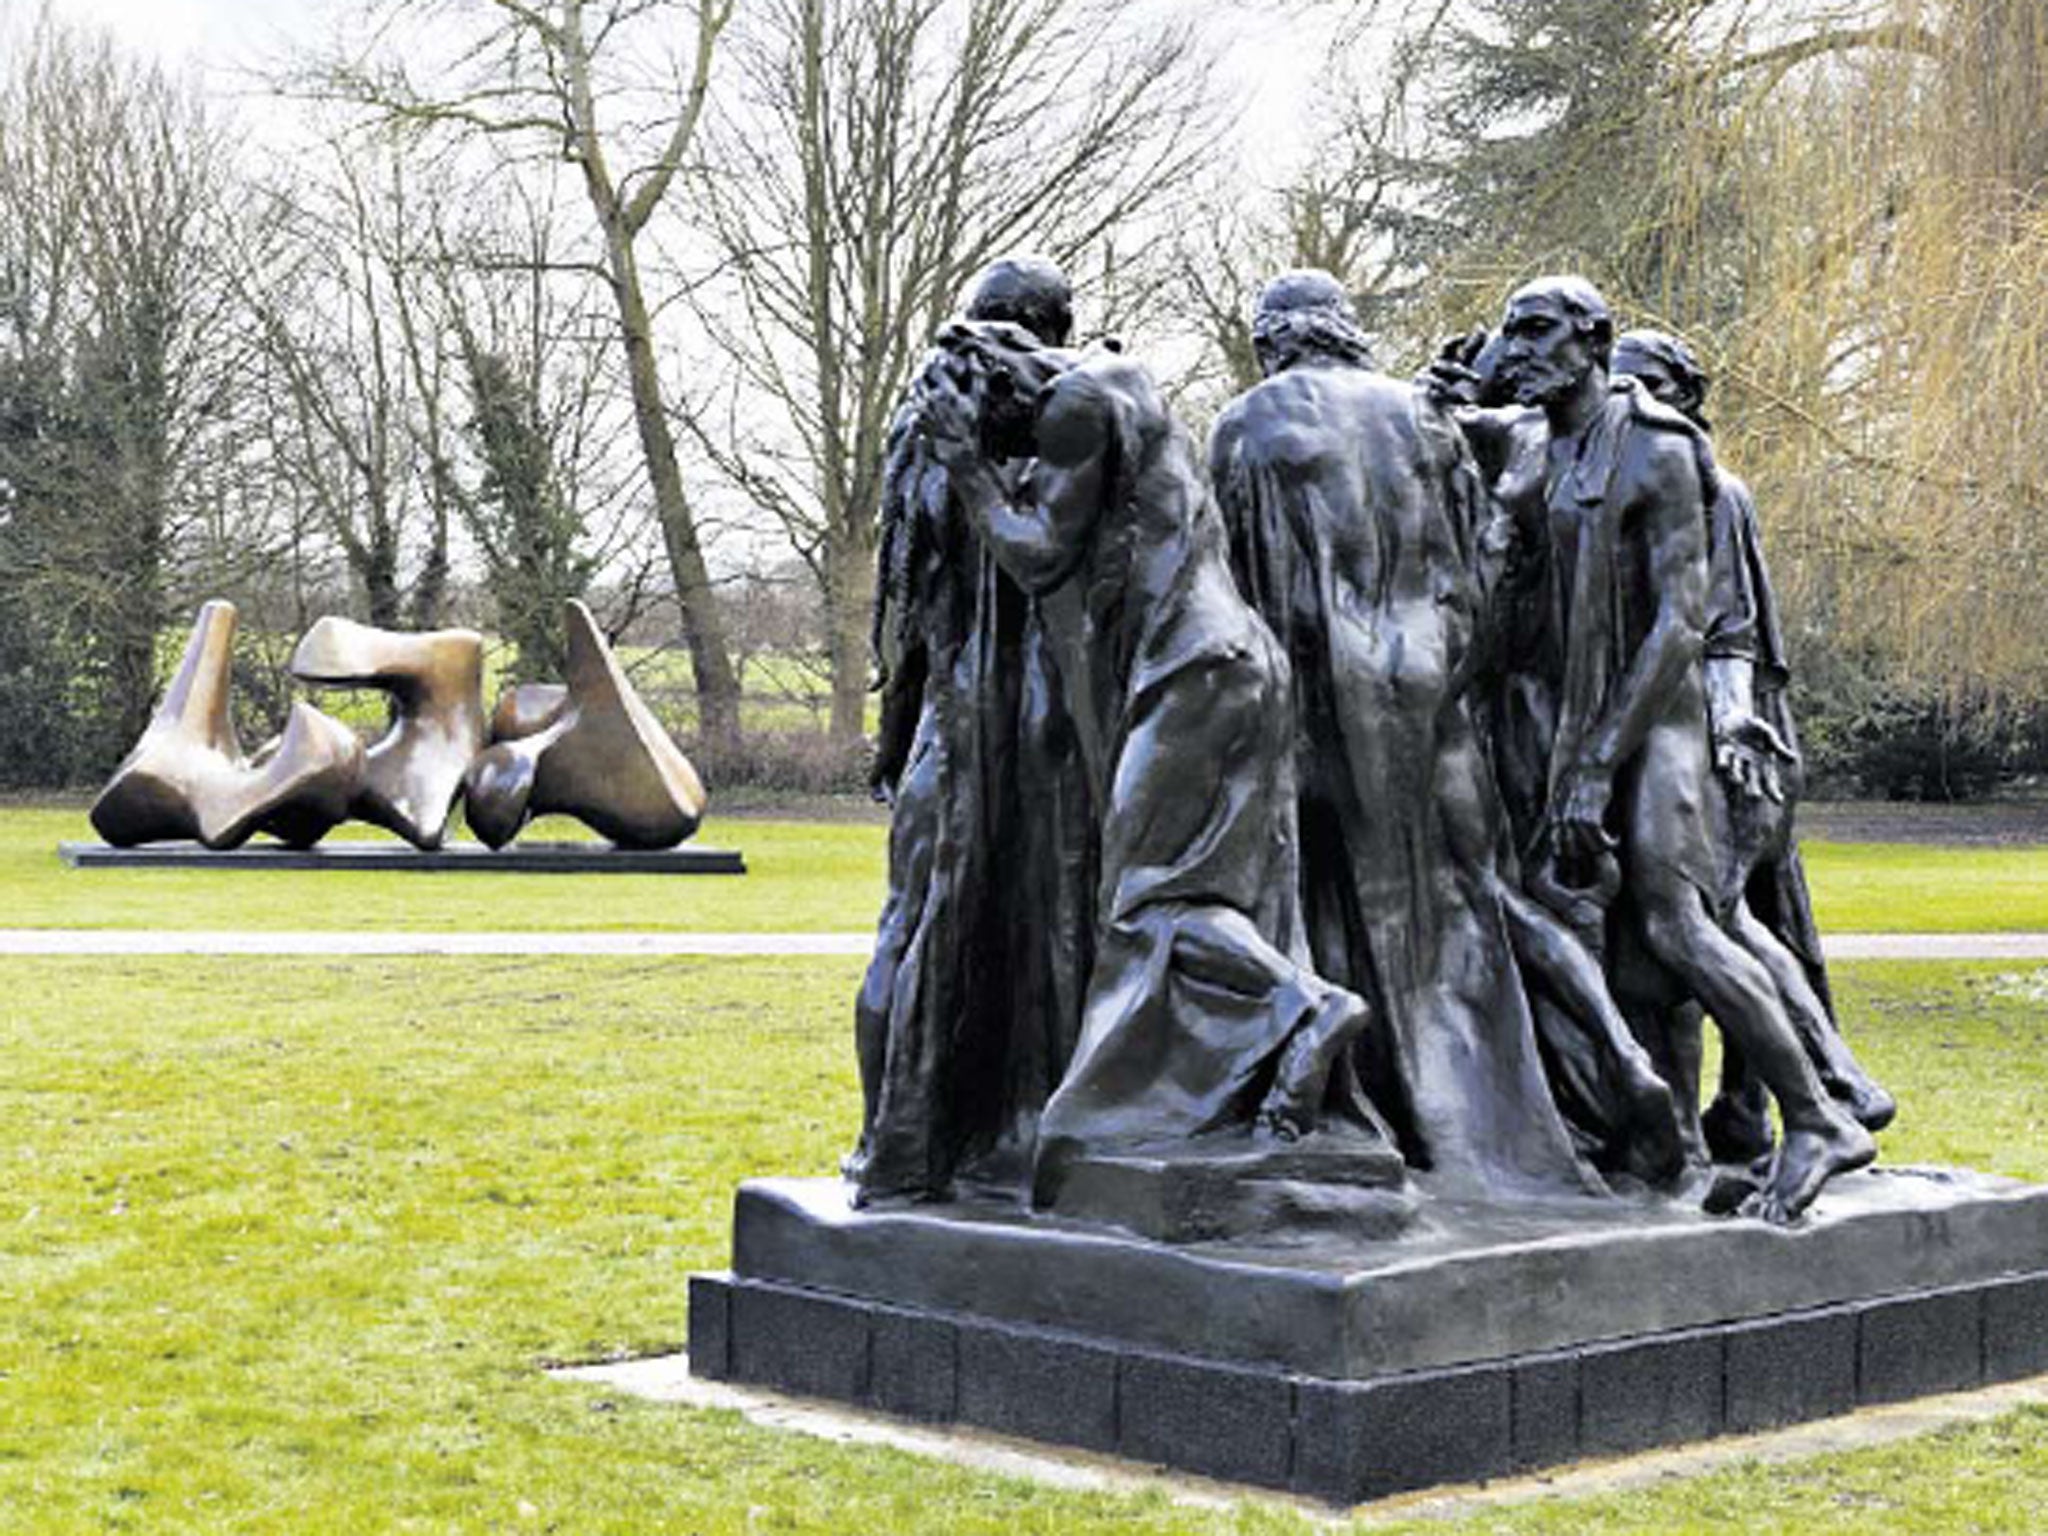 Moore’s Vertebrae is juxtaposed with Rodin’s The Burghers of Calais